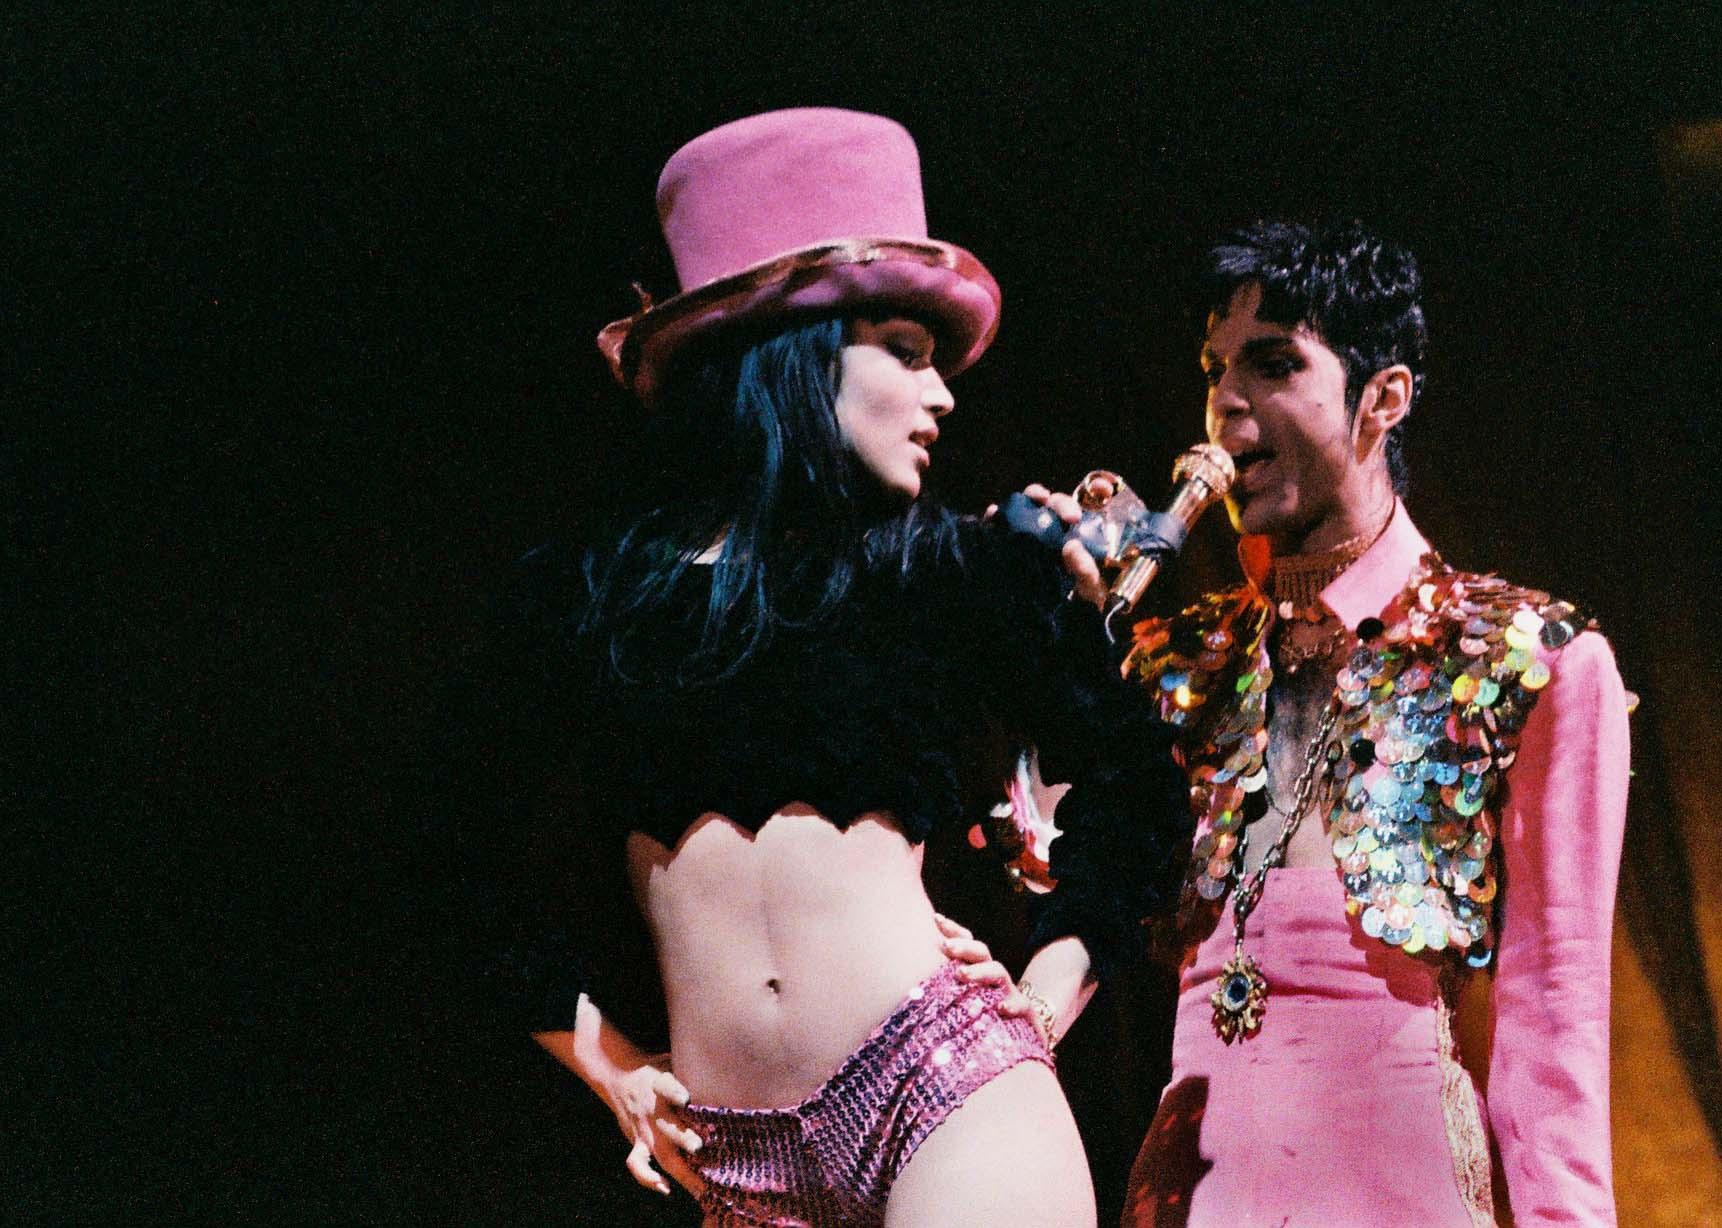 Mayte Garcia and Prince perform onstage on The Ultimate Live Experience tour.